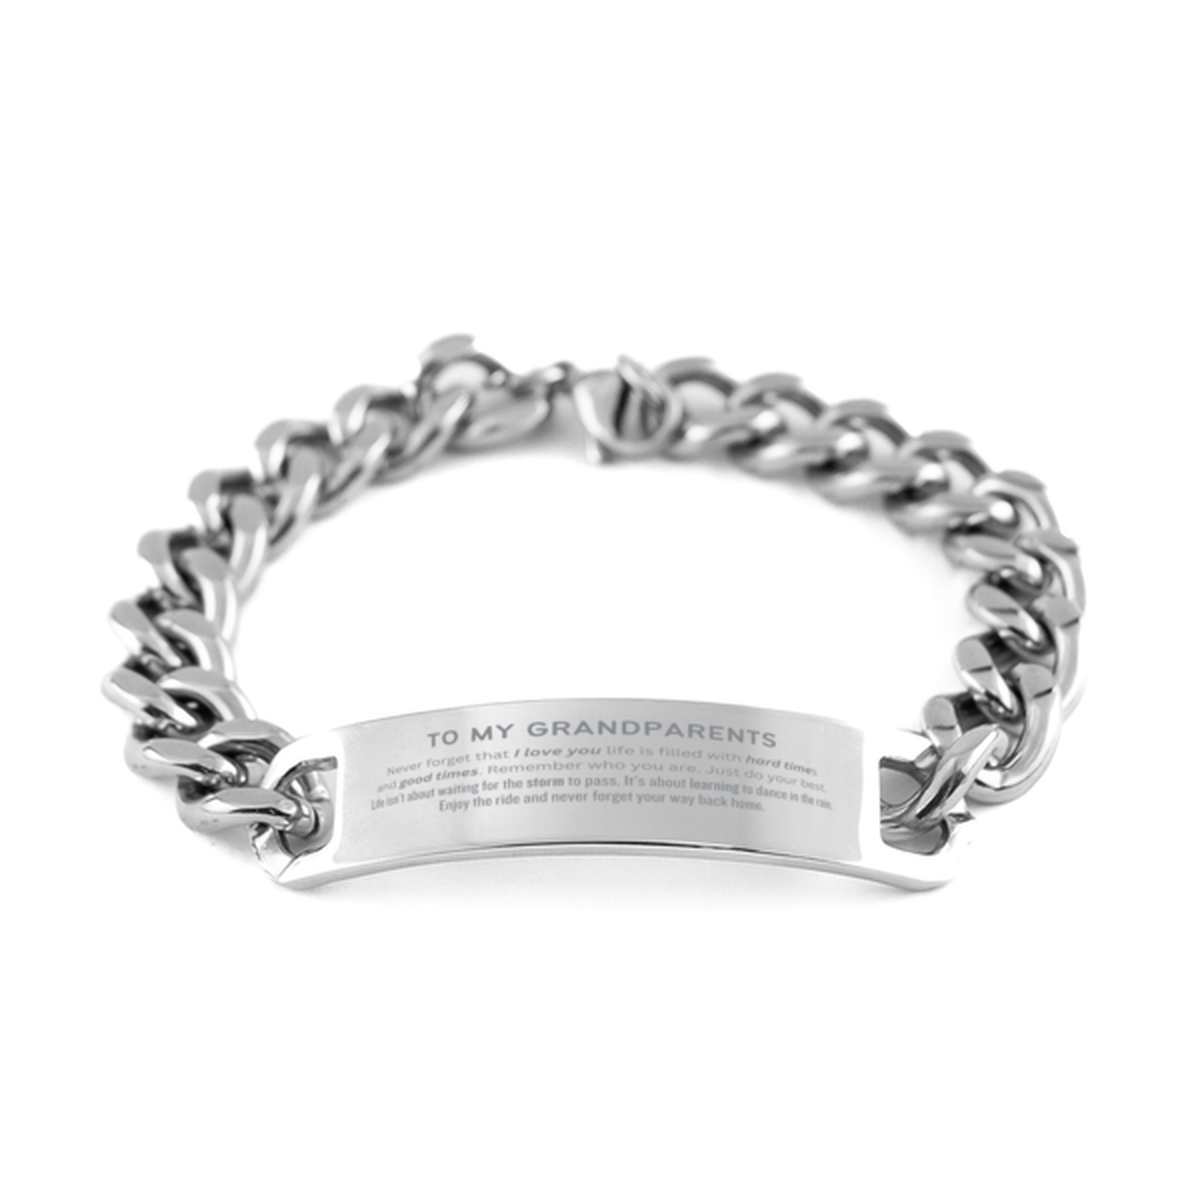 Christmas Grandparents Cuban Chain Stainless Steel Bracelet Gifts, To My Grandparents Birthday Thank You Gifts For Grandparents, Graduation Unique Gifts For Grandparents To My Grandparents Never forget that I love you life is filled with hard times and go